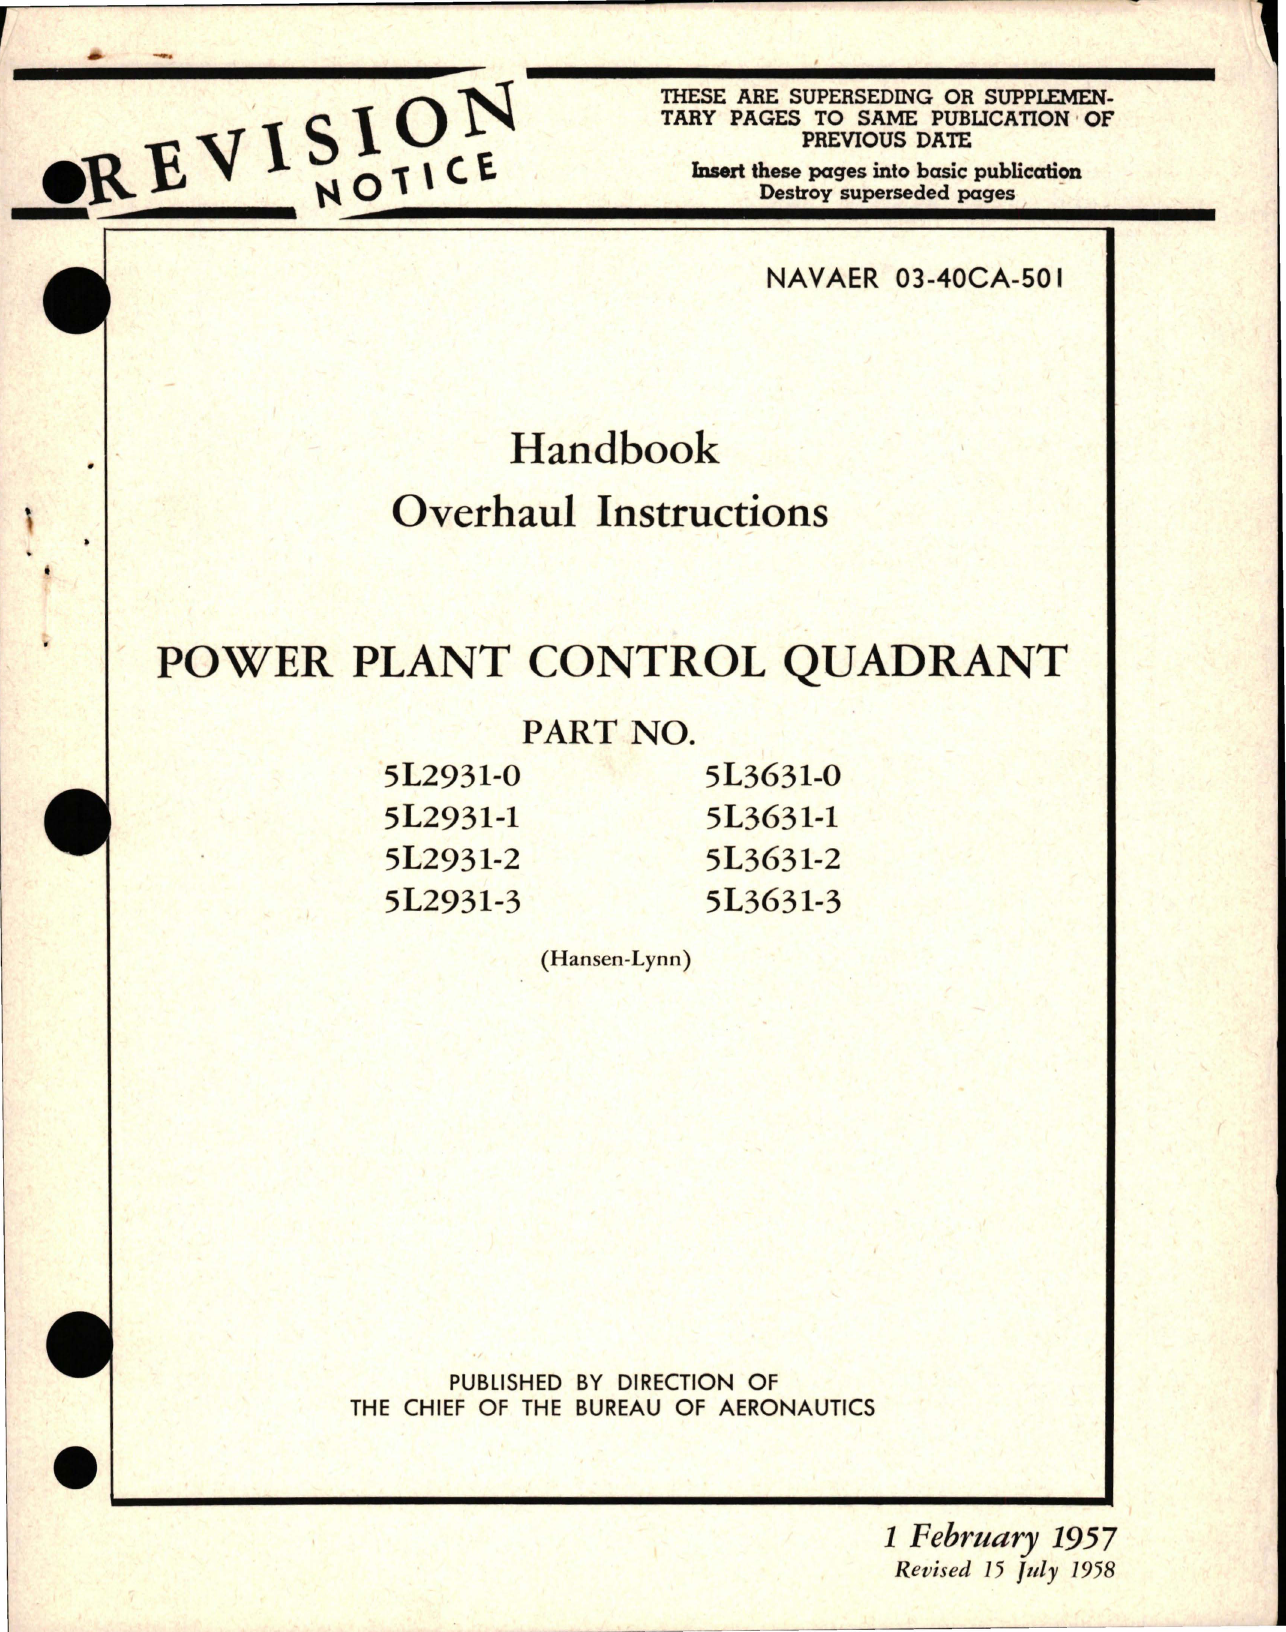 Sample page 1 from AirCorps Library document: Overhaul Instructions for Power Plant Control Quadrant